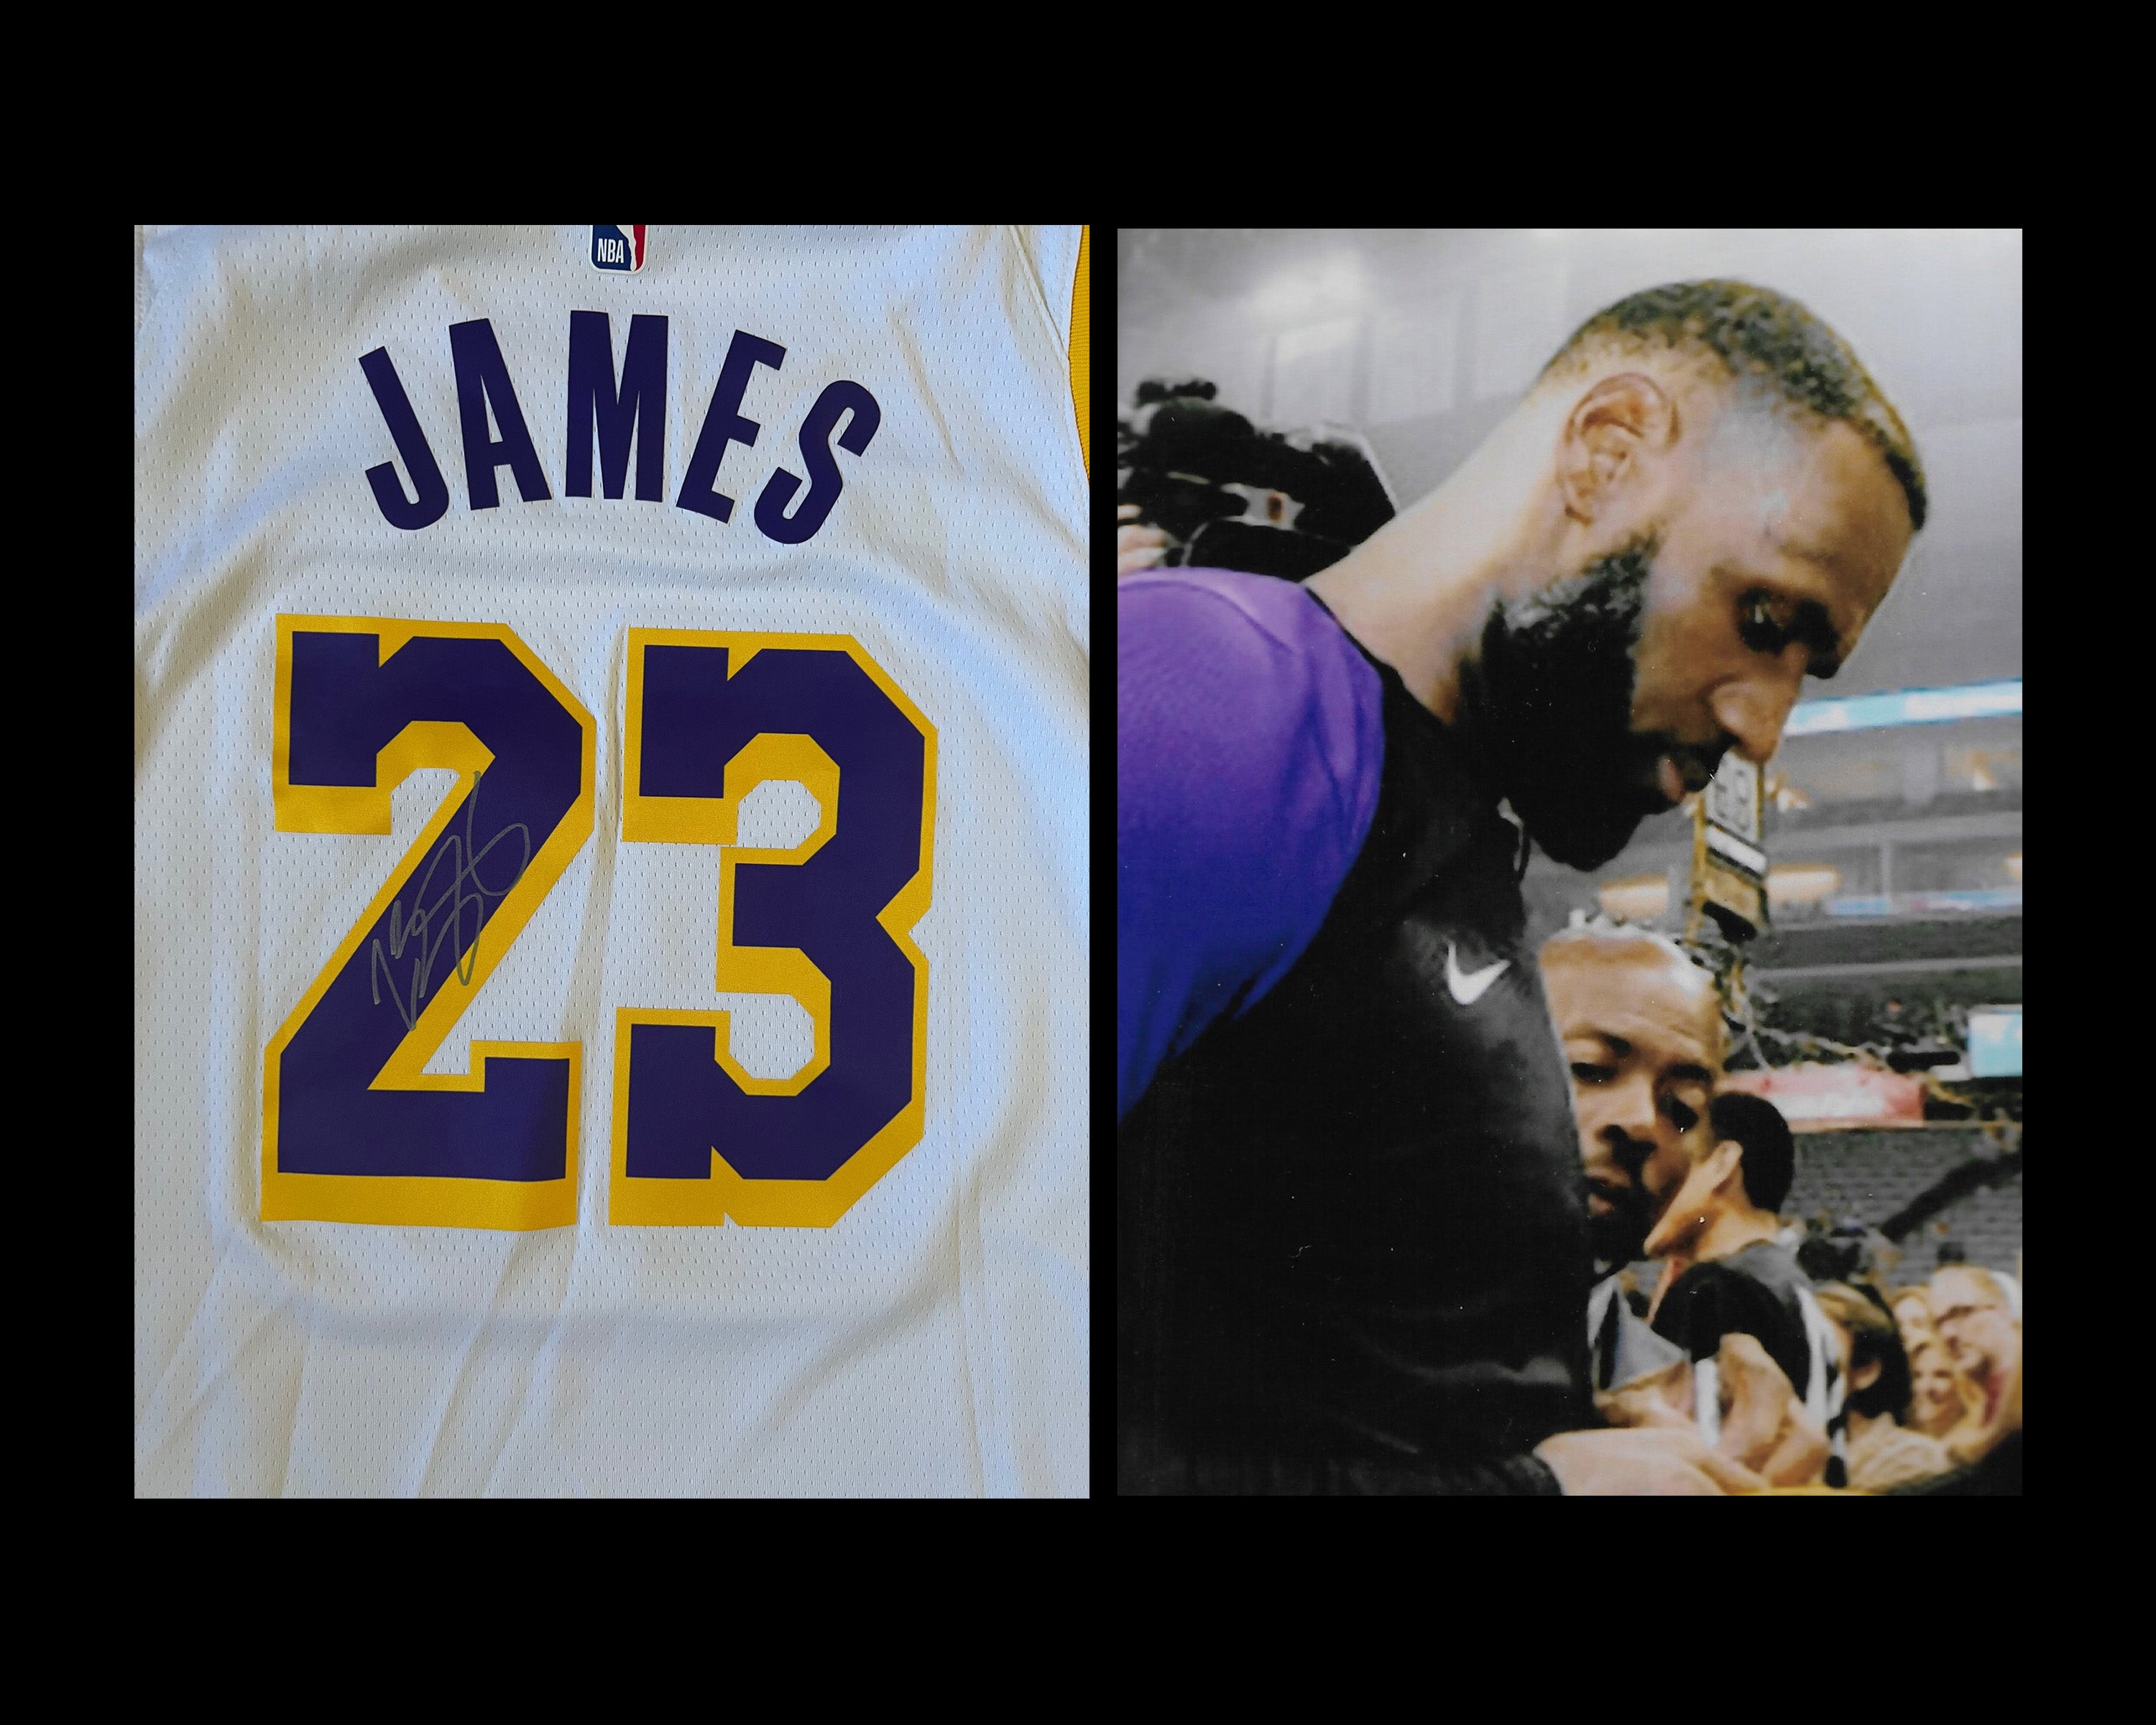 LeBron James Los Angeles Lakers Autographed Nike #23 Authentic Jersey